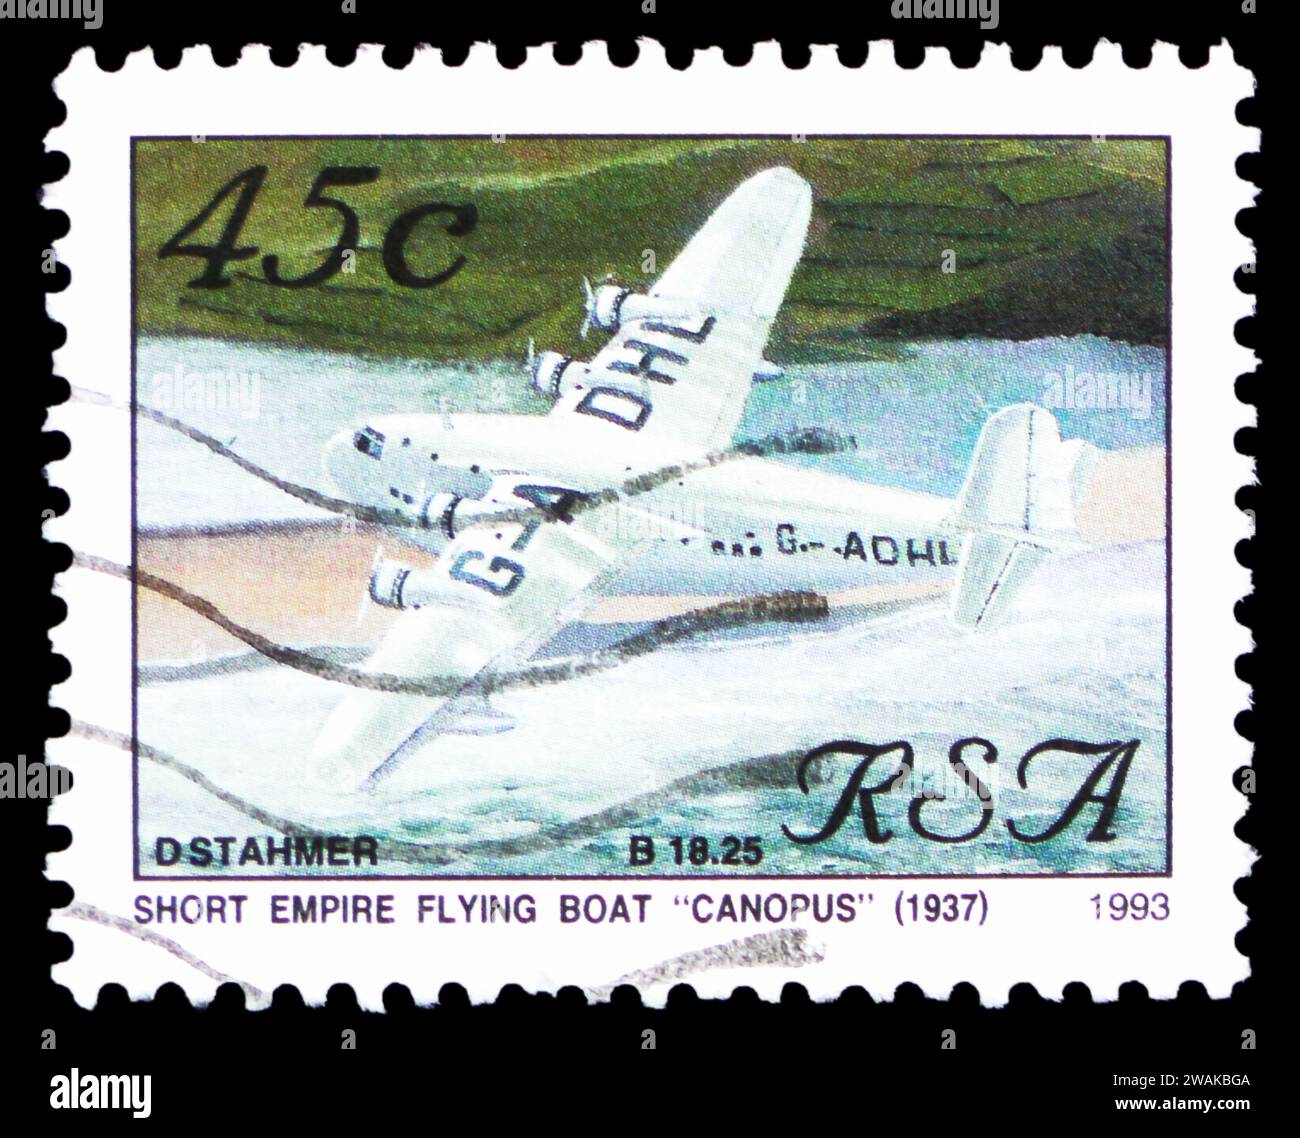 MOSCOW, RUSSIA - DECEMBER 17, 2023: Postage stamp printed in South Africa shows Short Empire Flying Boat 'Canopus' (1937), Aviation in South Africa se Stock Photo